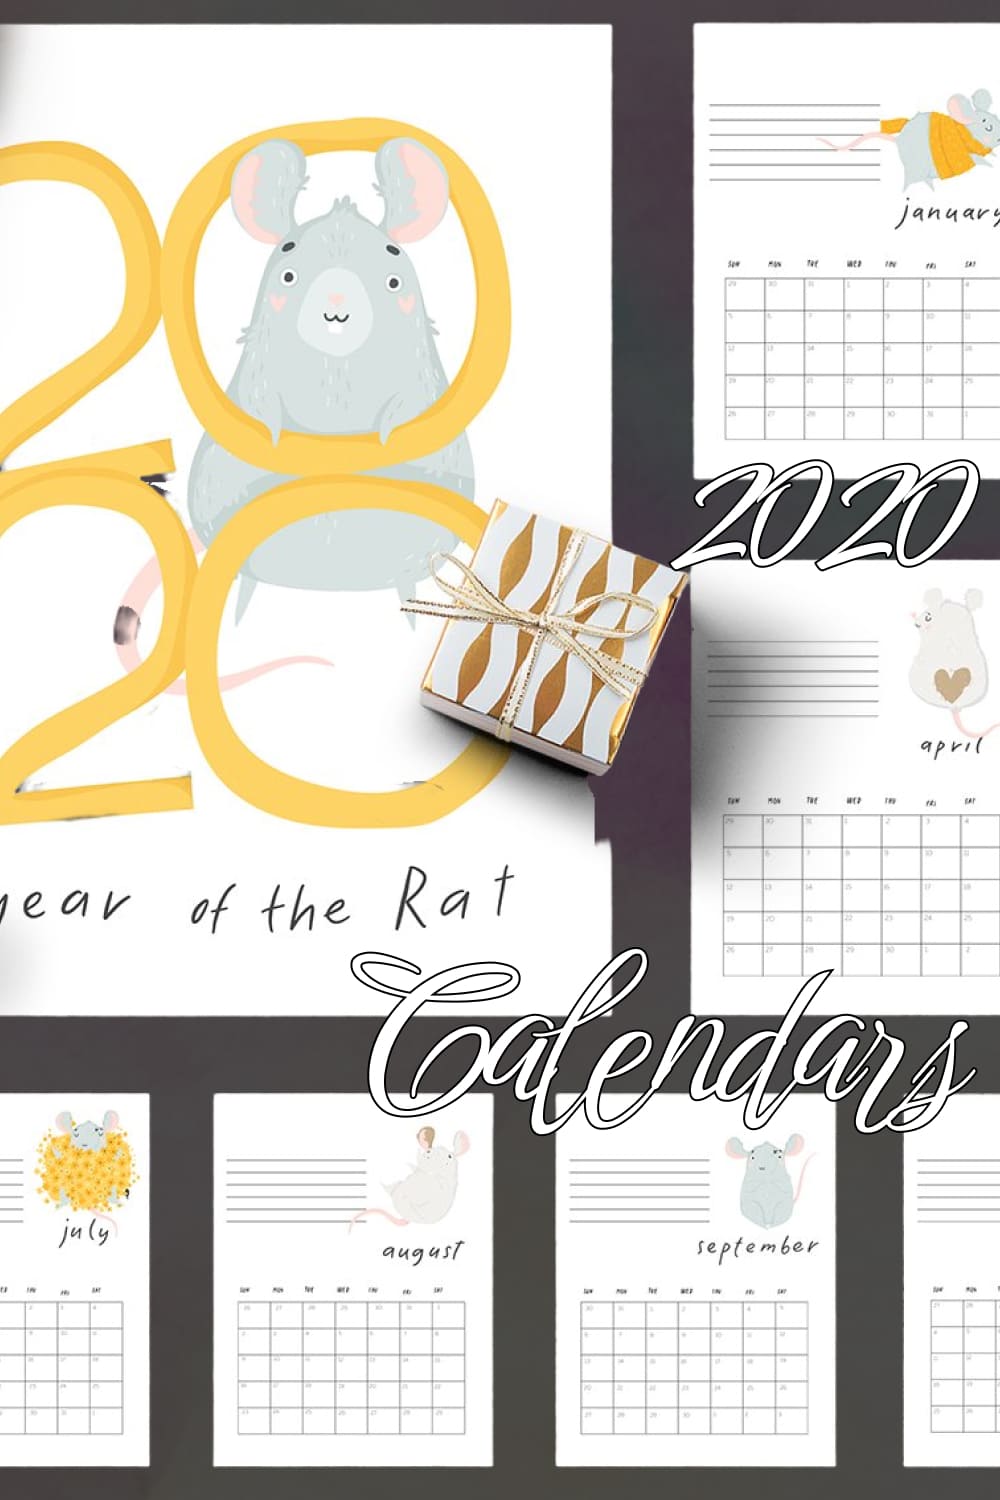 Cute Rat – 4 New Year 2020 Calendars - Pinterest image preview.